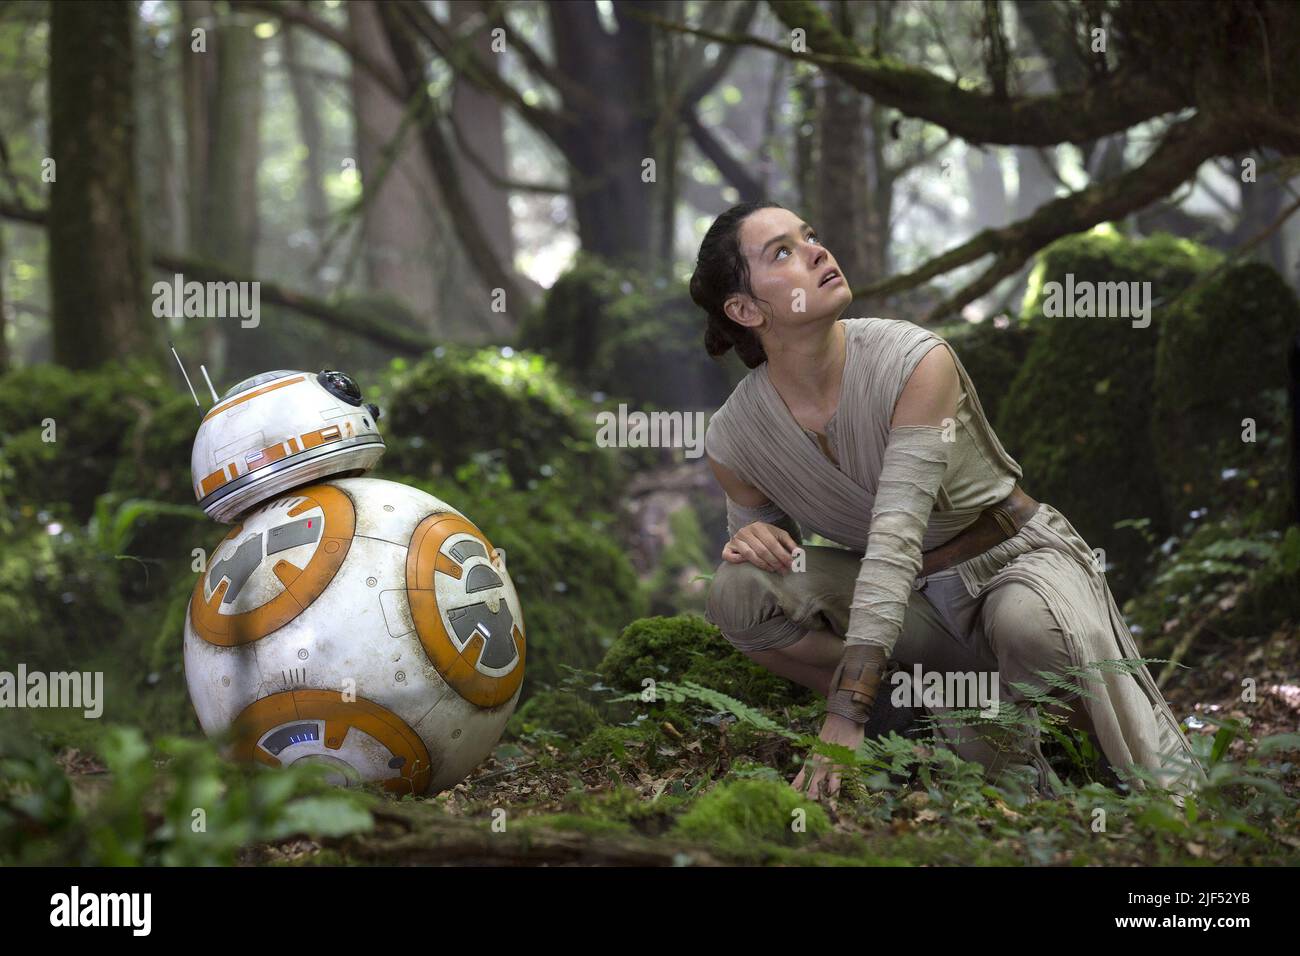 DROID,RIDLEY, STAR WARS: EPISODE VII - THE FORCE AWAKENS, 2015 Stock Photo